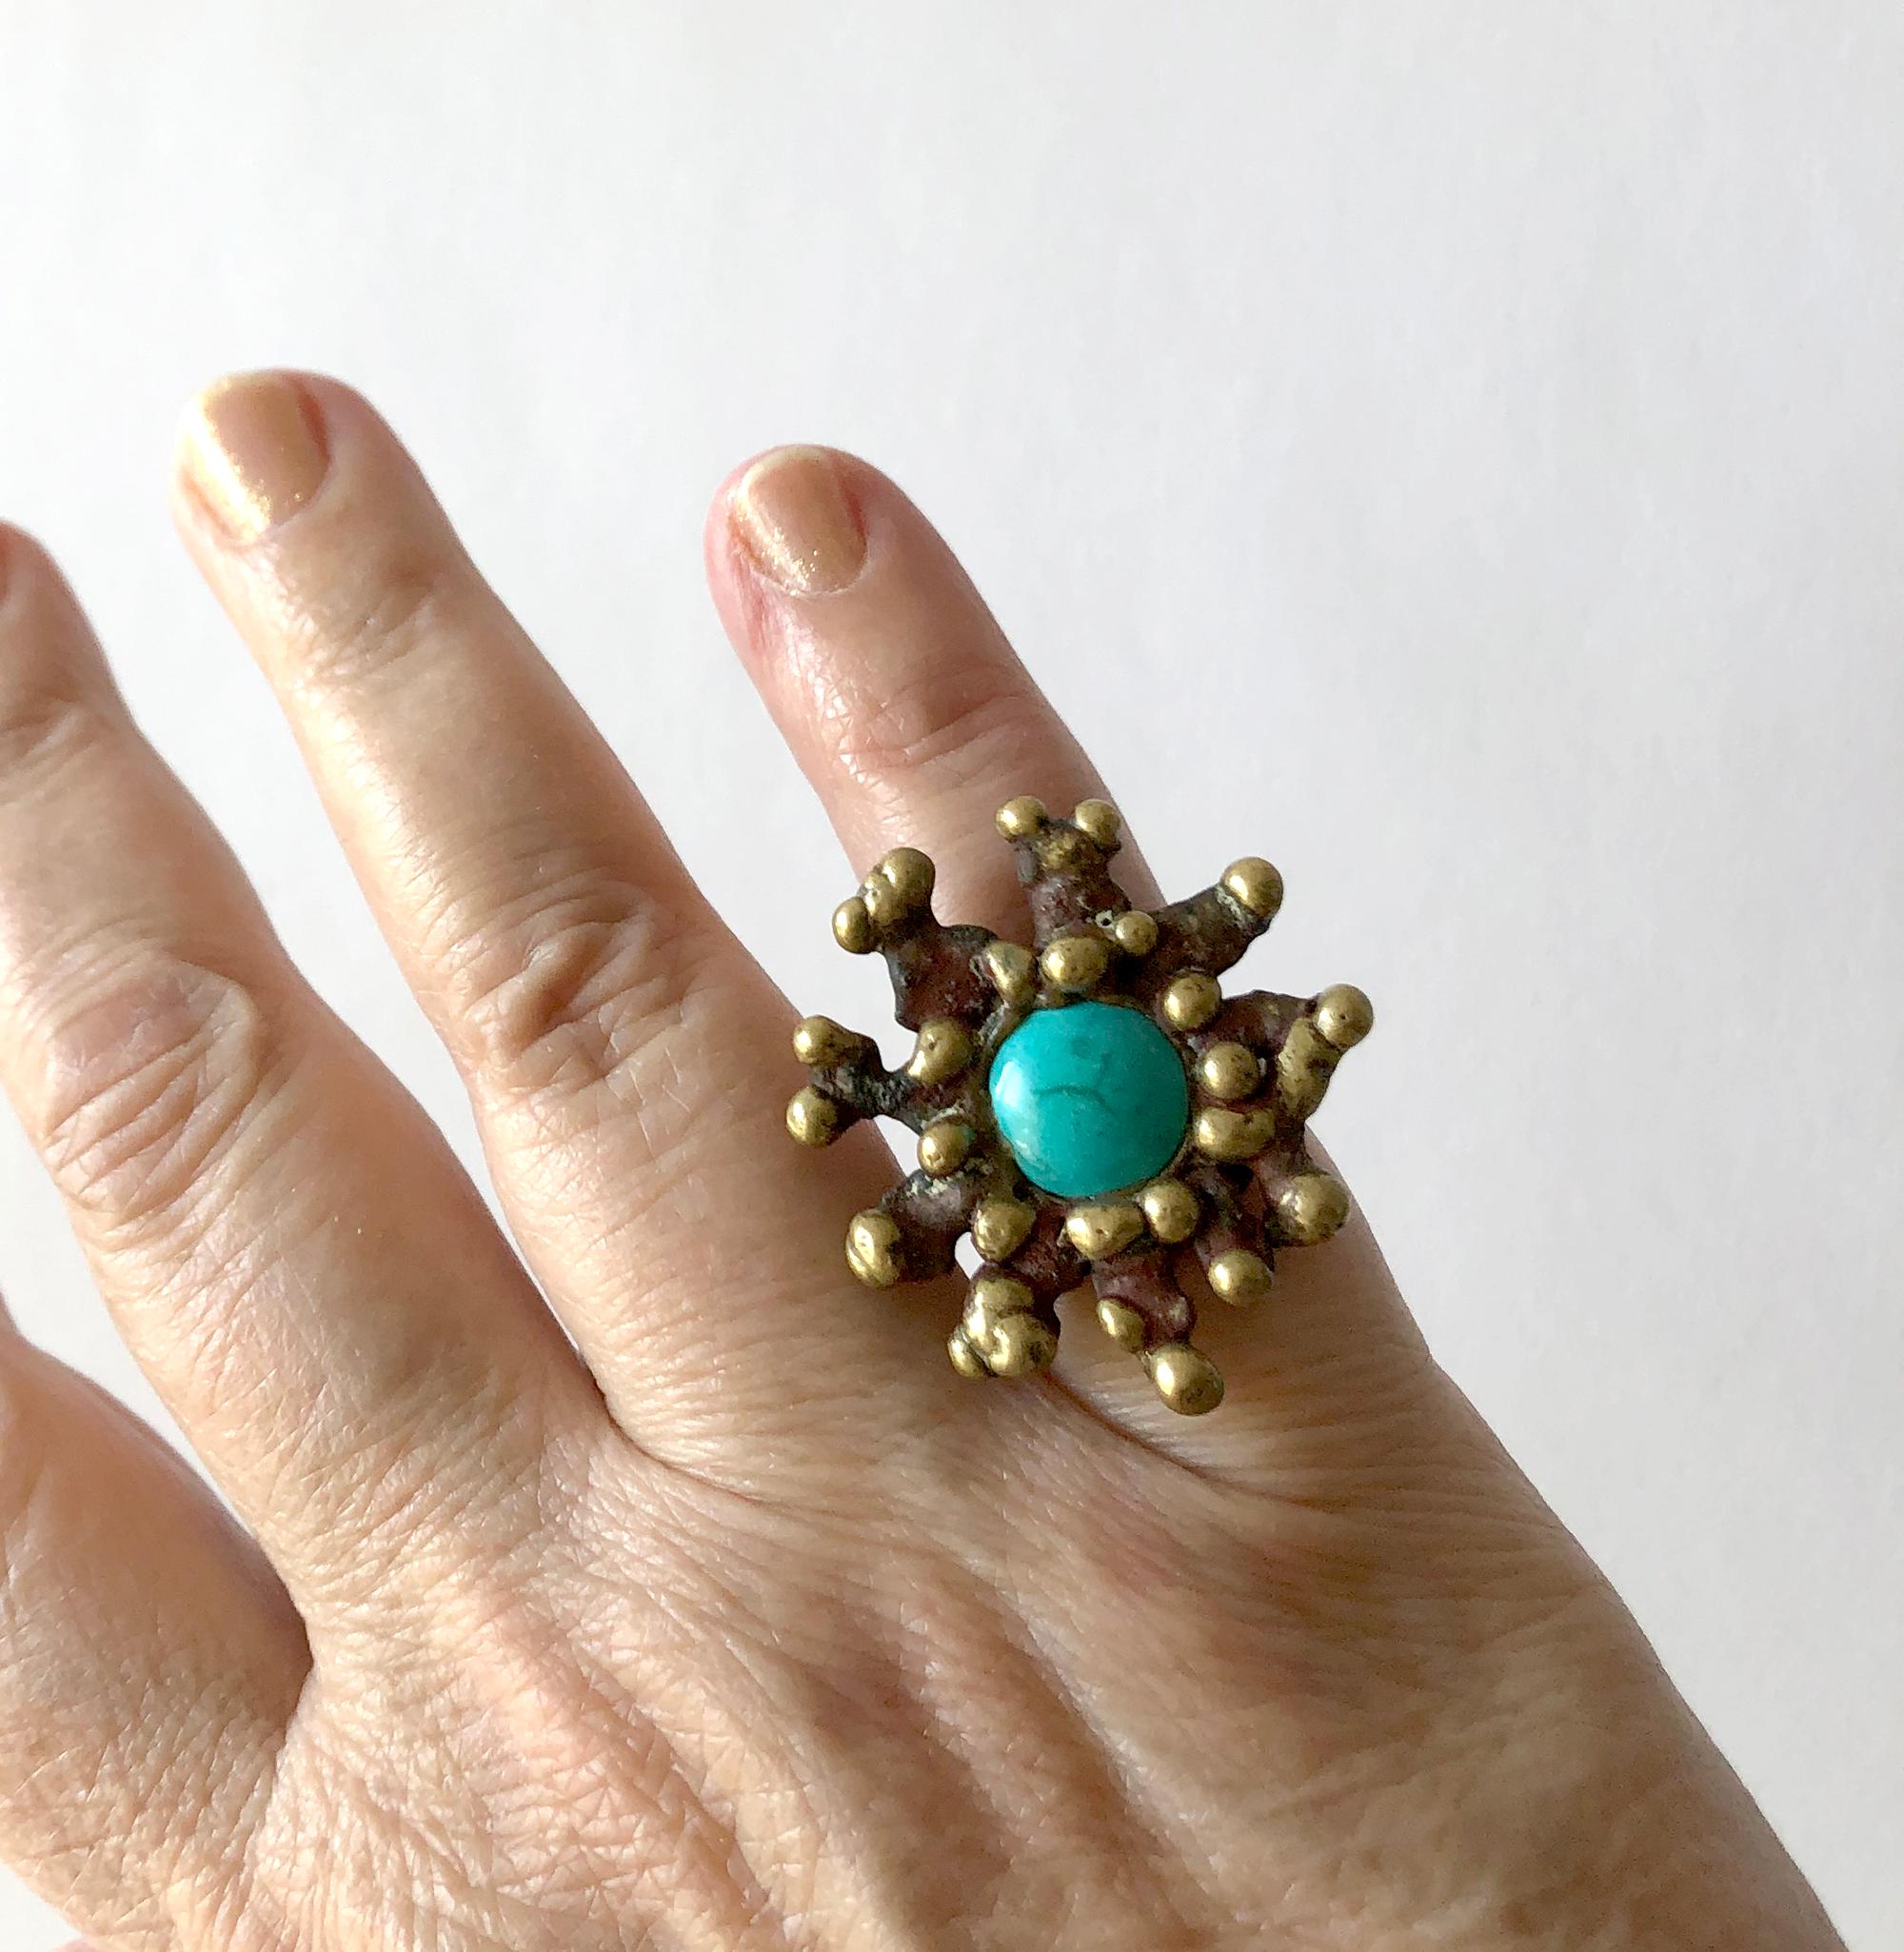 Artisan Pal Kepenyes Bronze Turquoise Mexican Modernist Ring